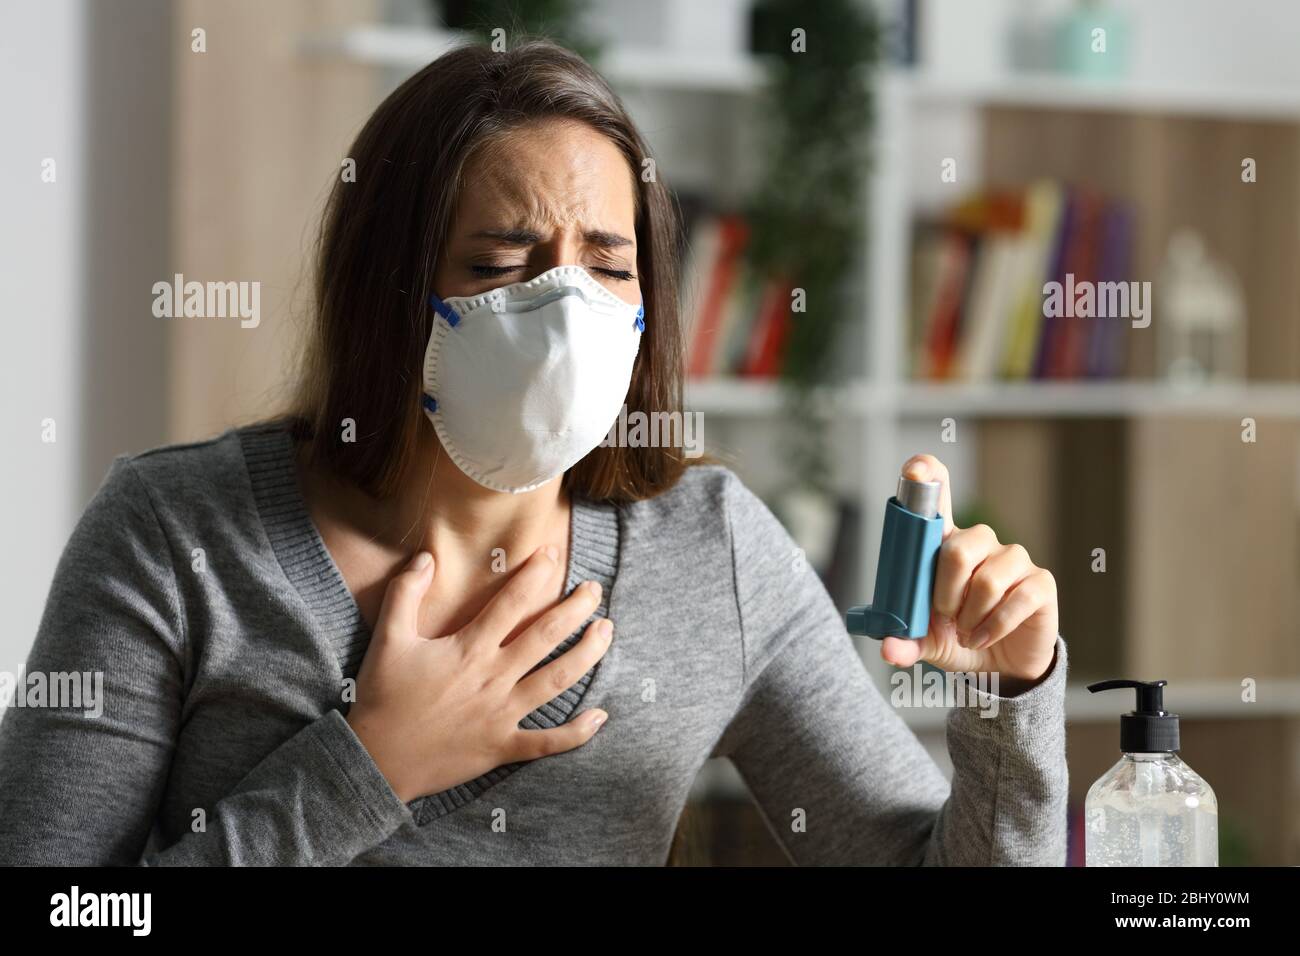 Woman with protective mask suffocating due covid-19 holds inhaler sitting on a desk at night Stock Photo